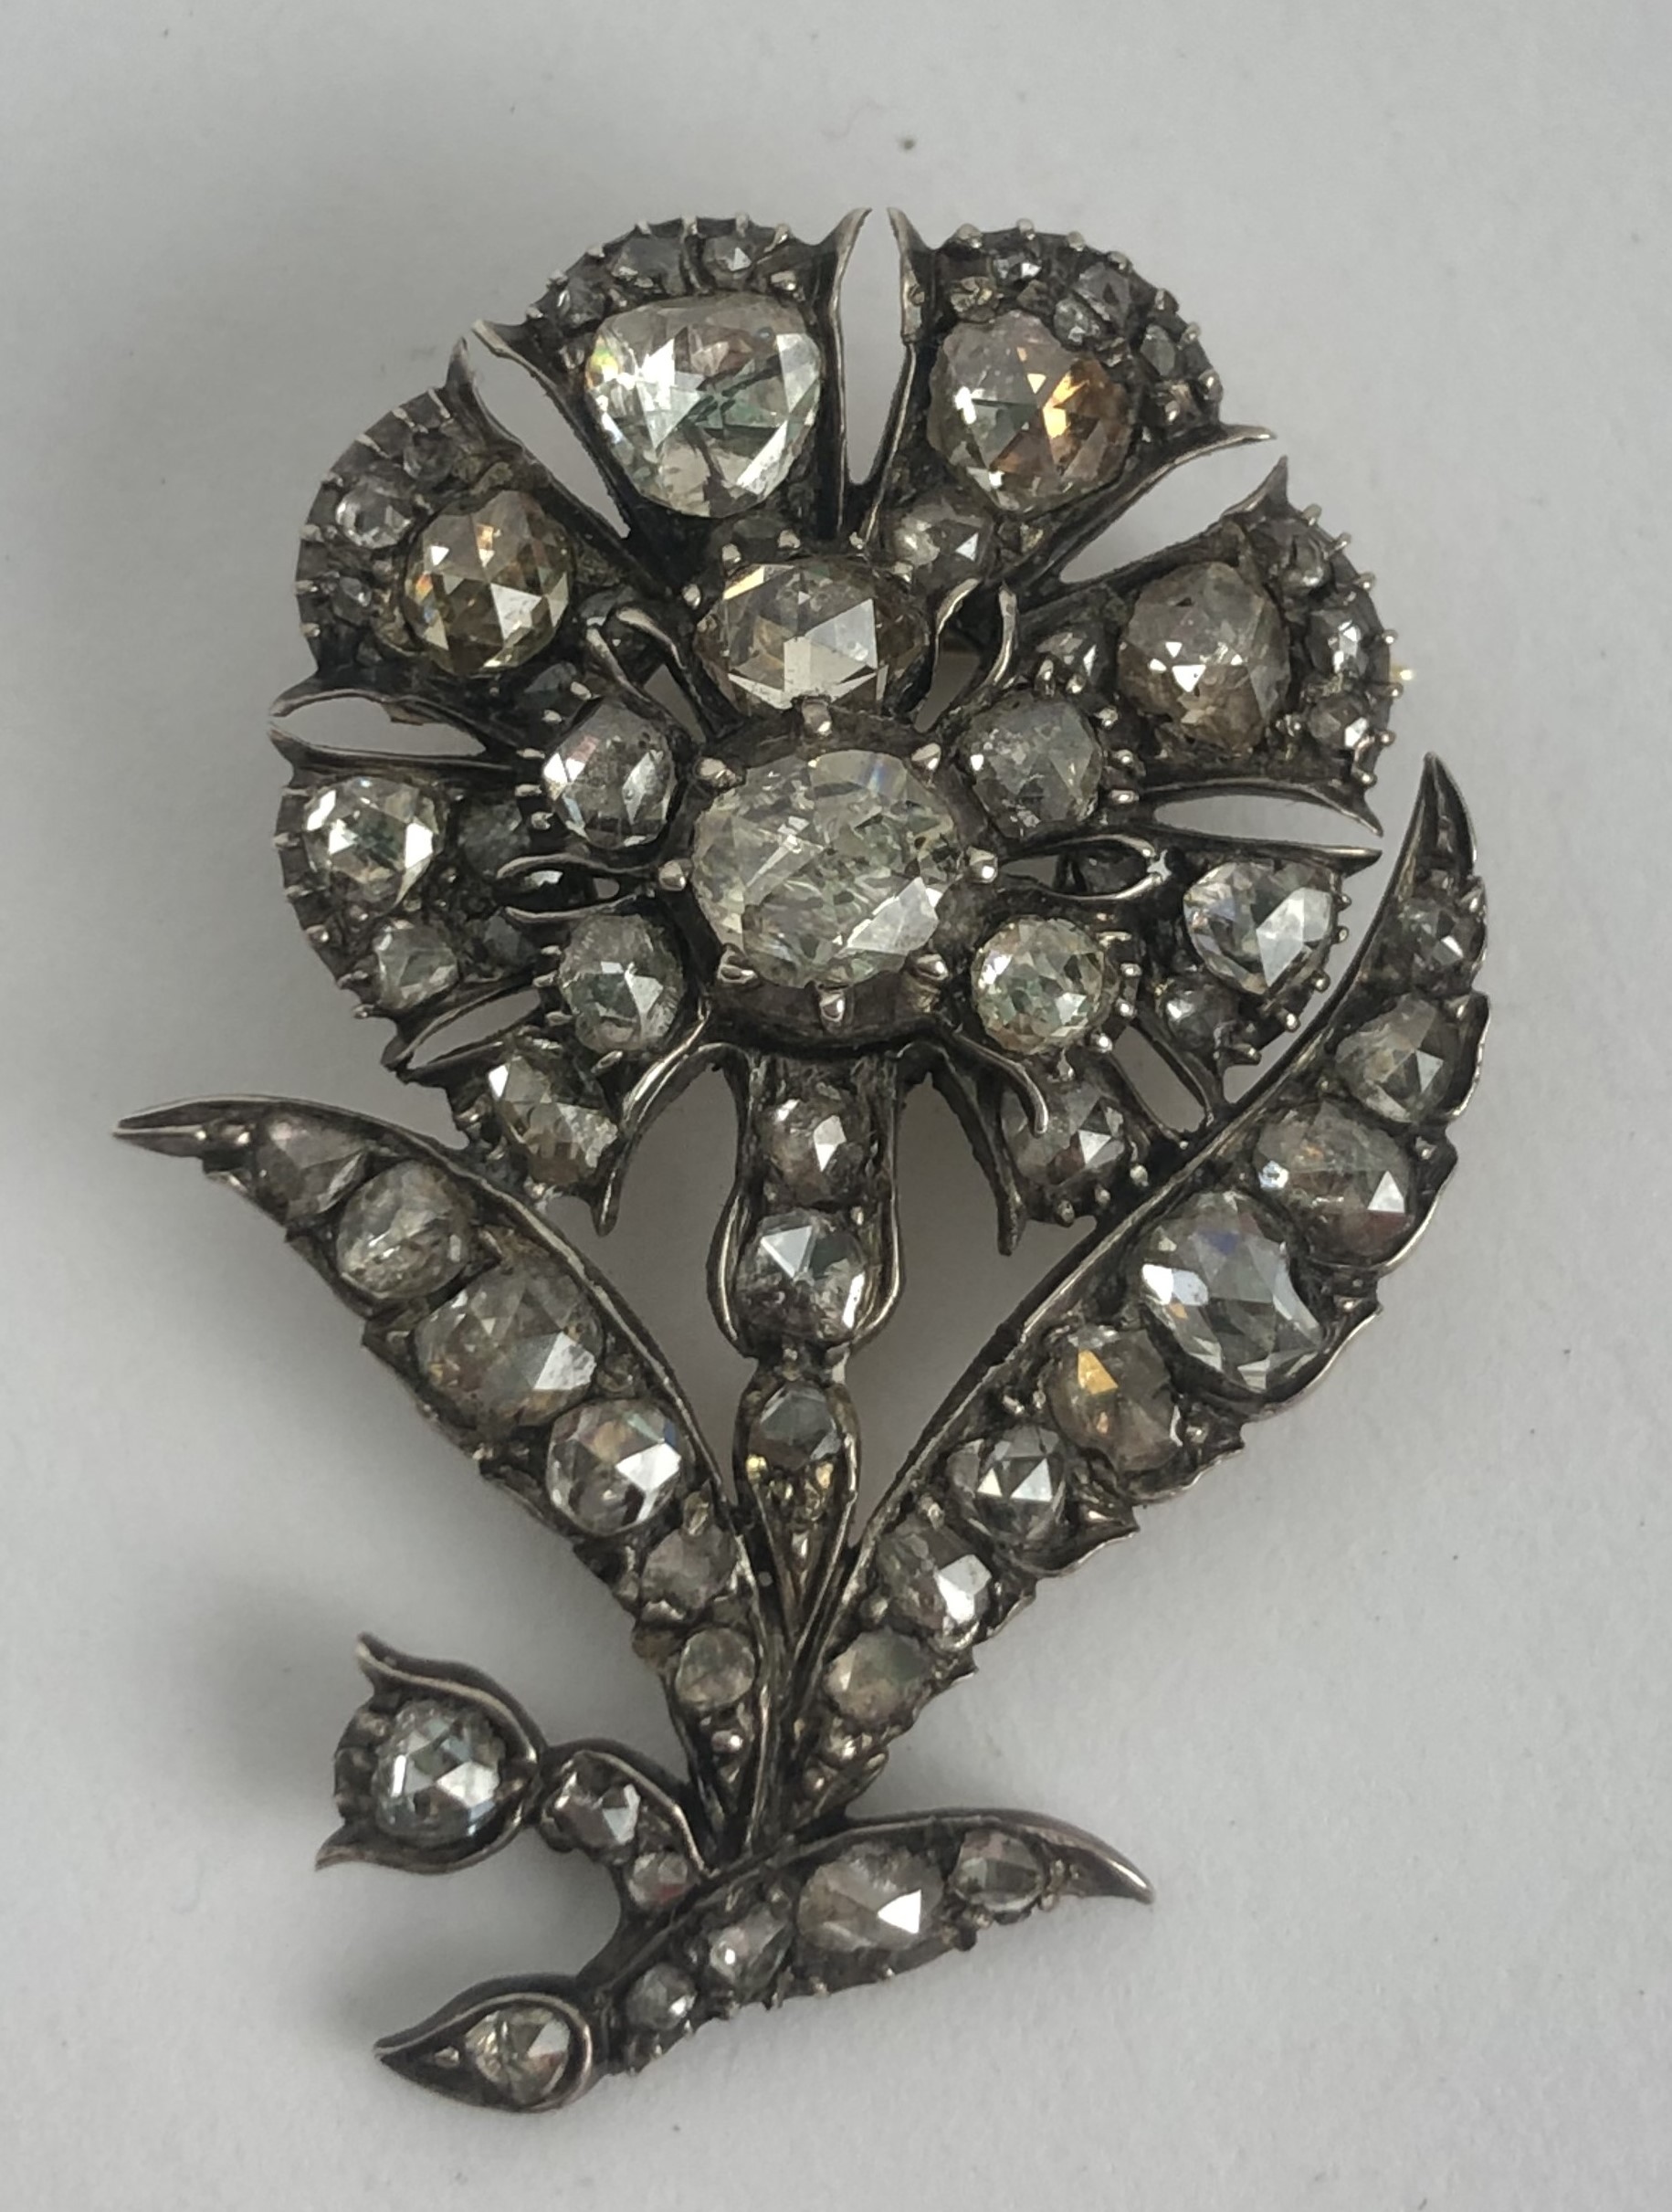 A 19th century diamond brooch, in the form of a flower 4.25 x 3 cm approx. weight: 8.5 g all in